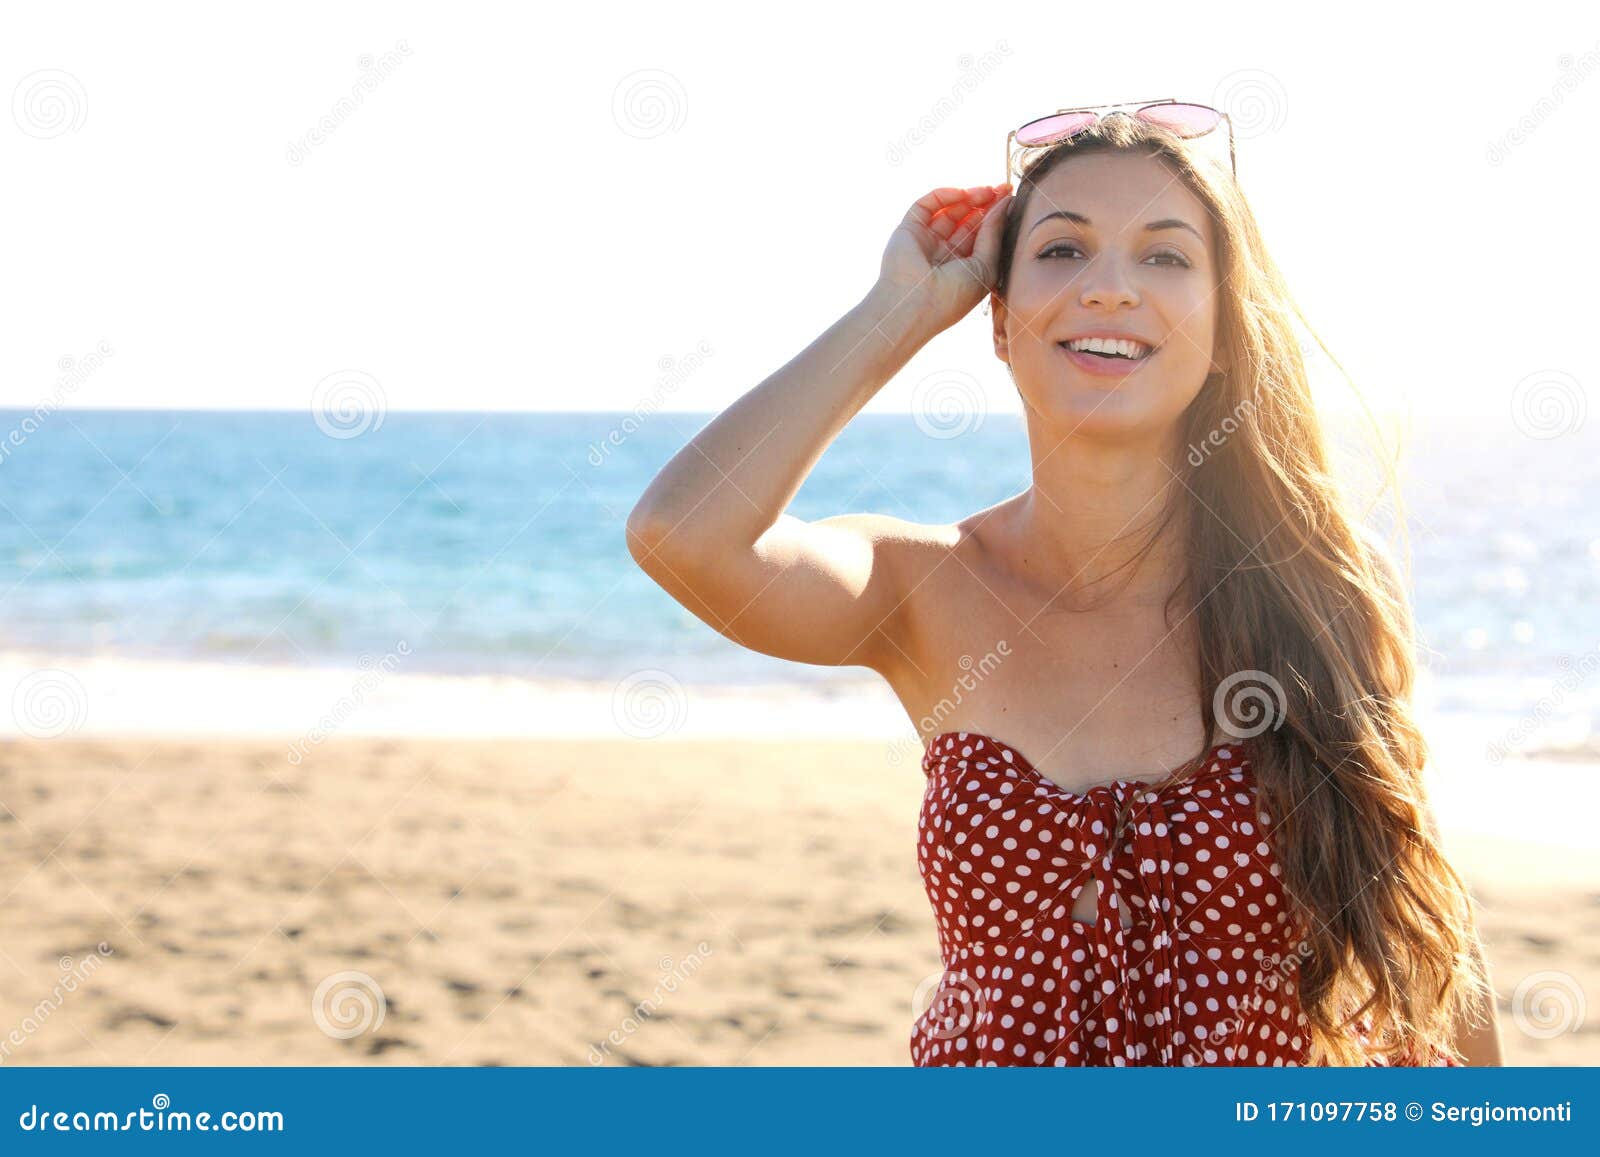 Beauty Fashion Tanned Woman With Sunglasses On Her Head On The Beach Looking To The Camera Stock